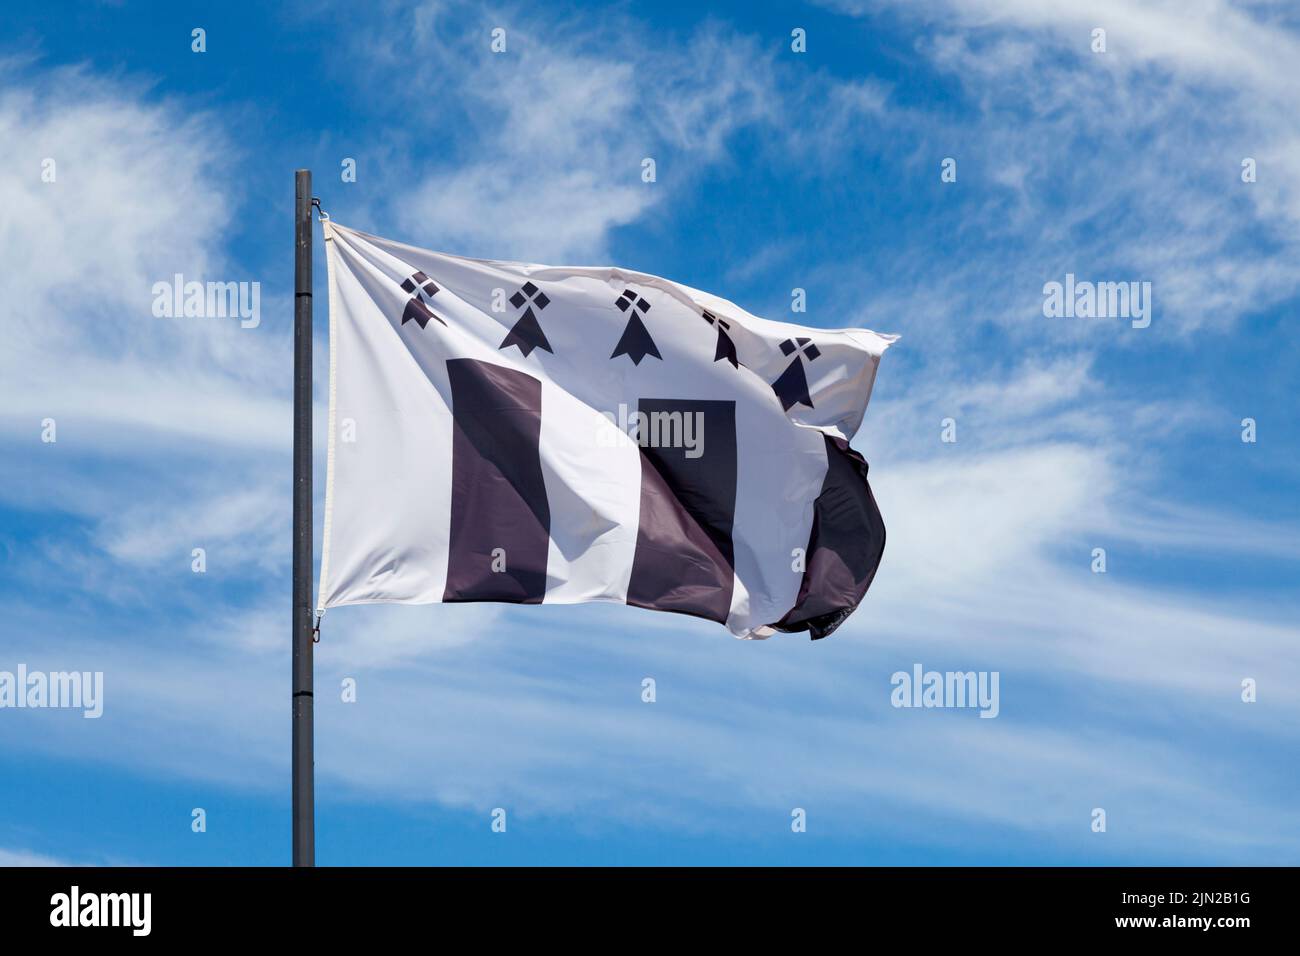 Flag of the city of Rennes waving in mid air. Stock Photo